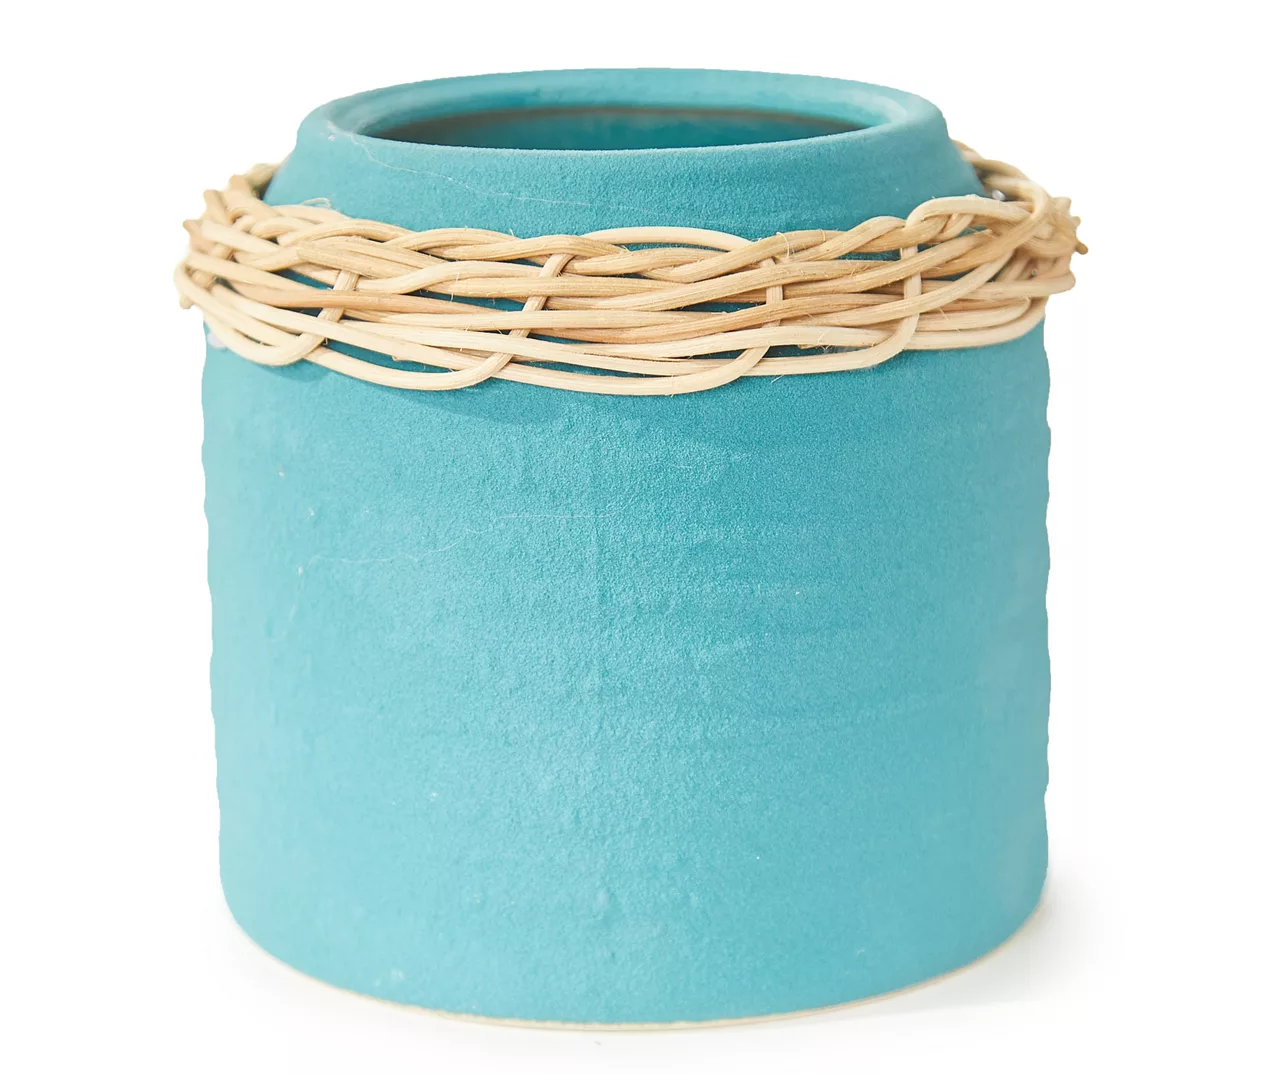 NEW Teal Bamboo Weave Textured Ceramic Planter Gardening Flower Pot 6 x 5.5 in - £7.95 GBP